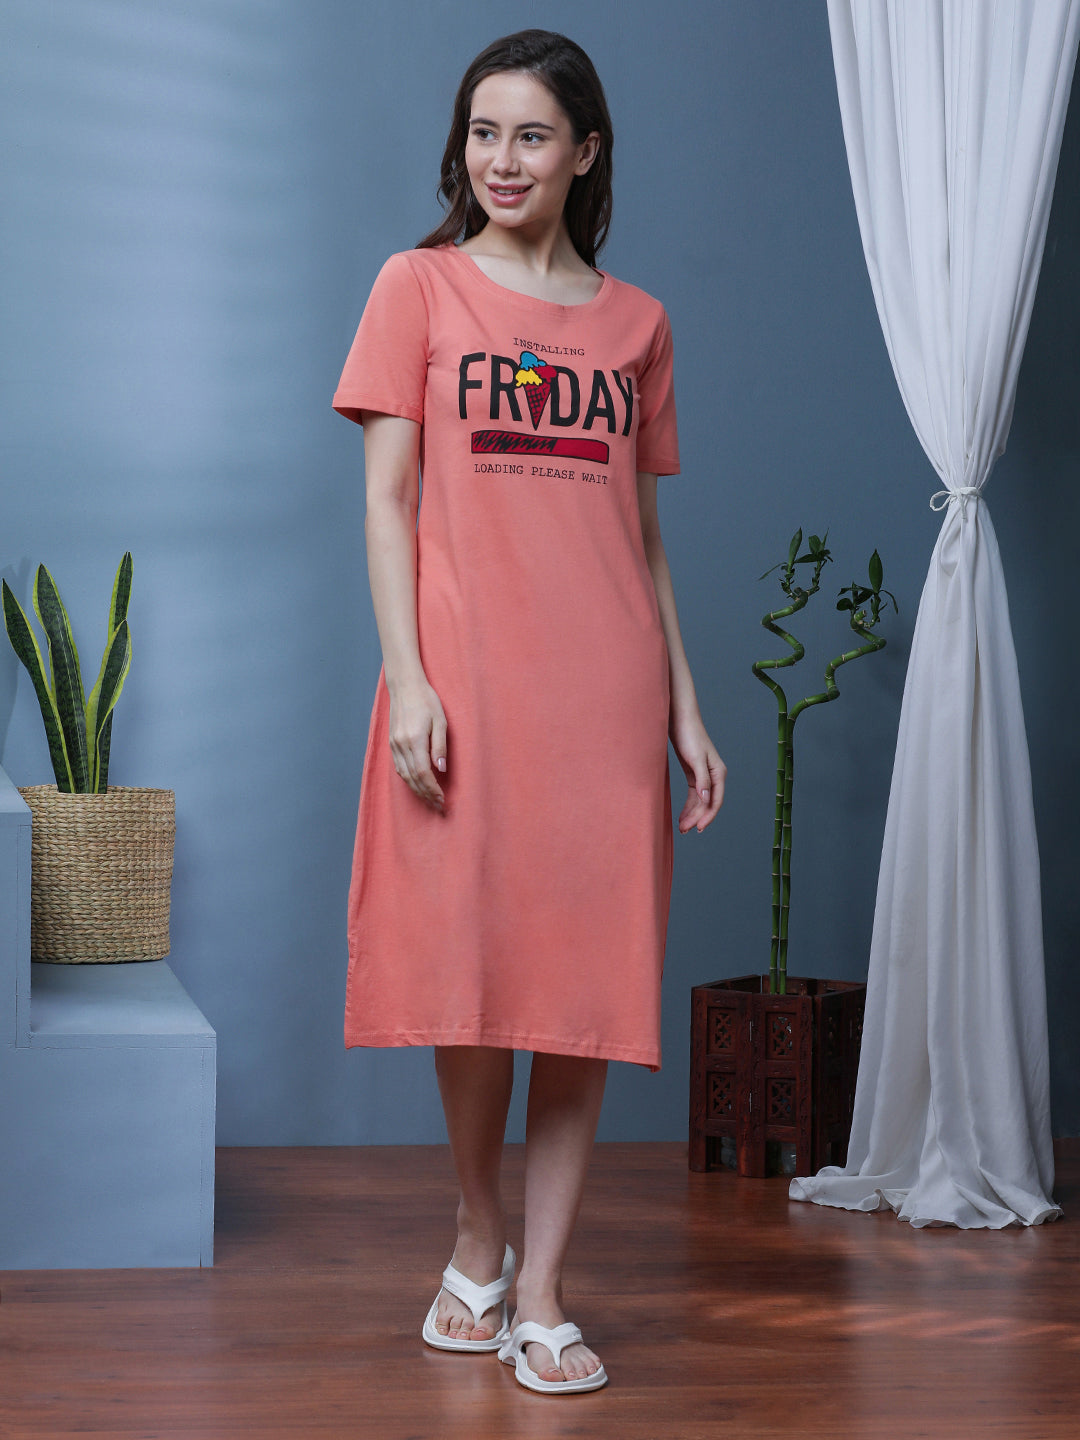 FRIDAY LOADING Mid Length Nightdress in Peach